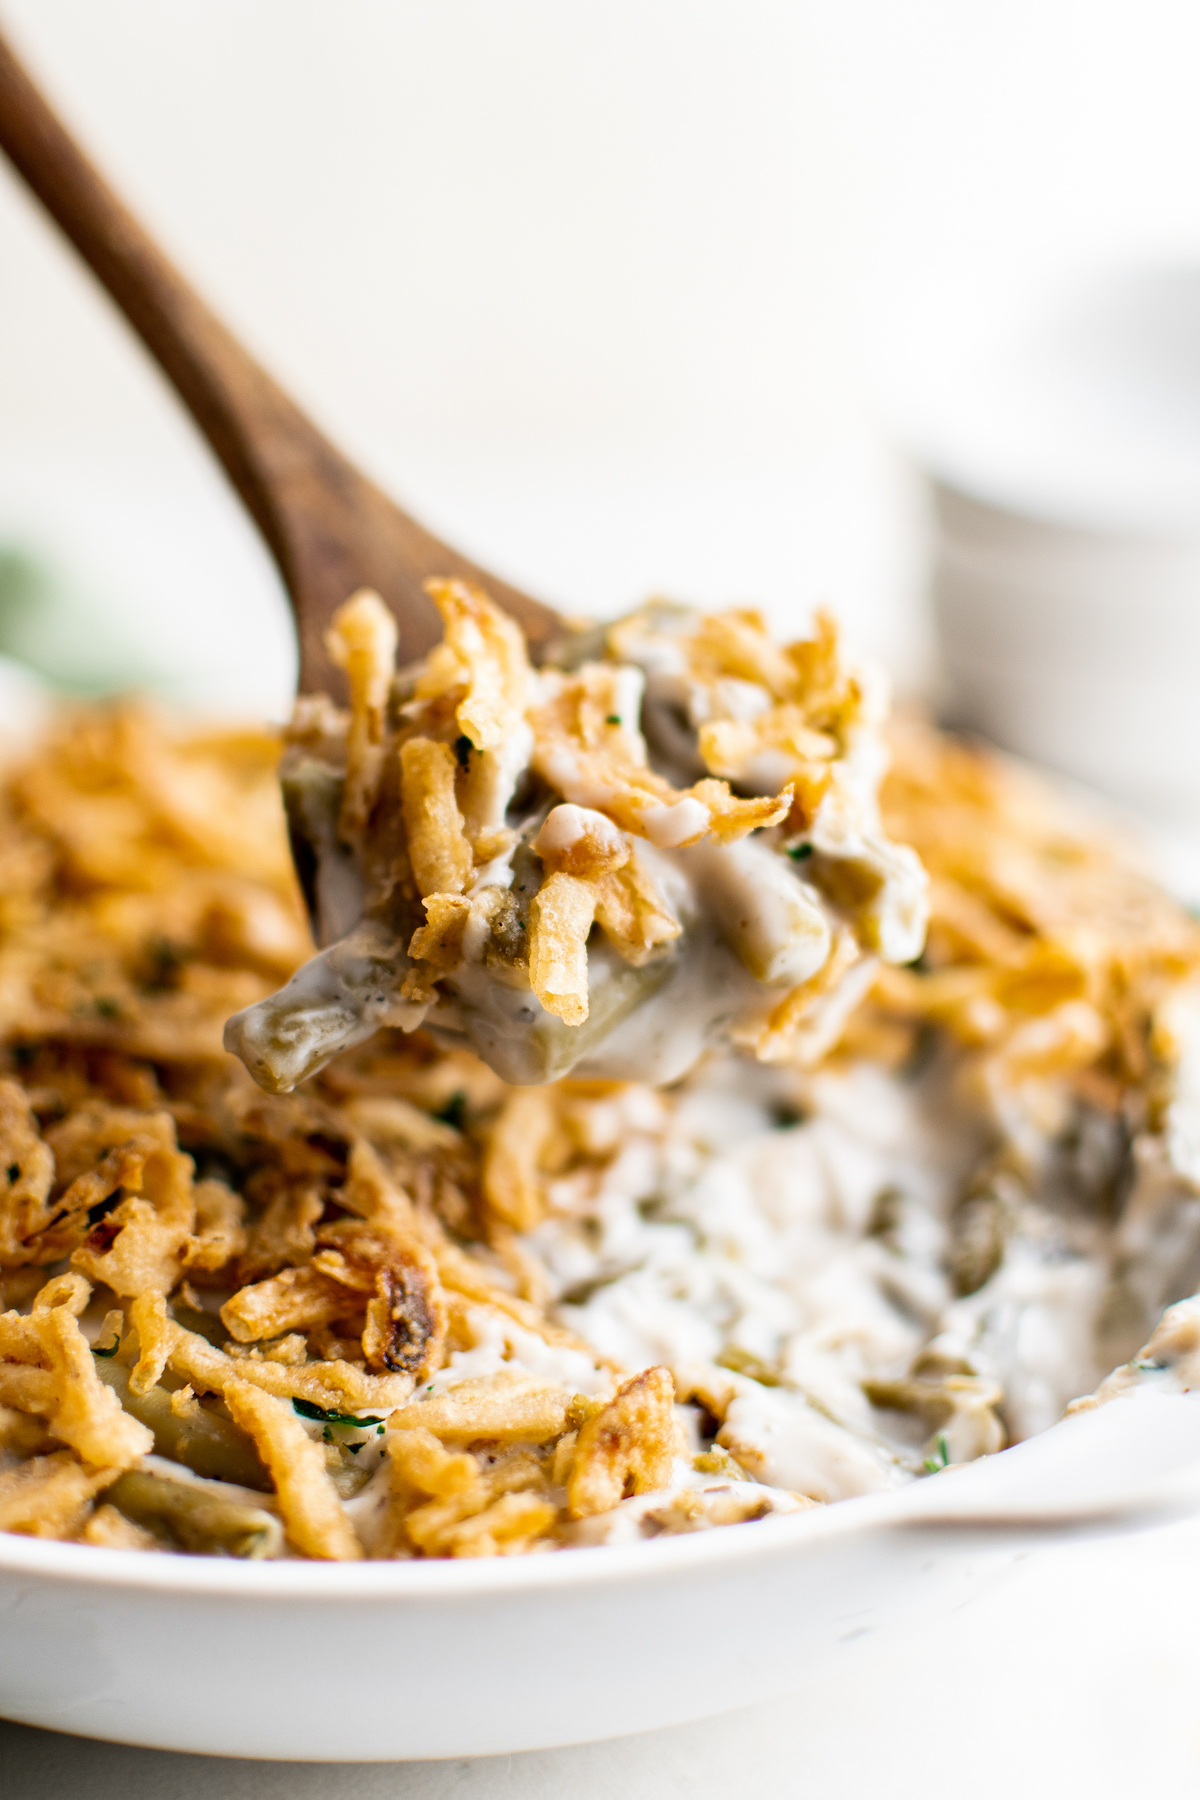 A wooden spoon lifting a portion of easy green bean casserole out of a dish.